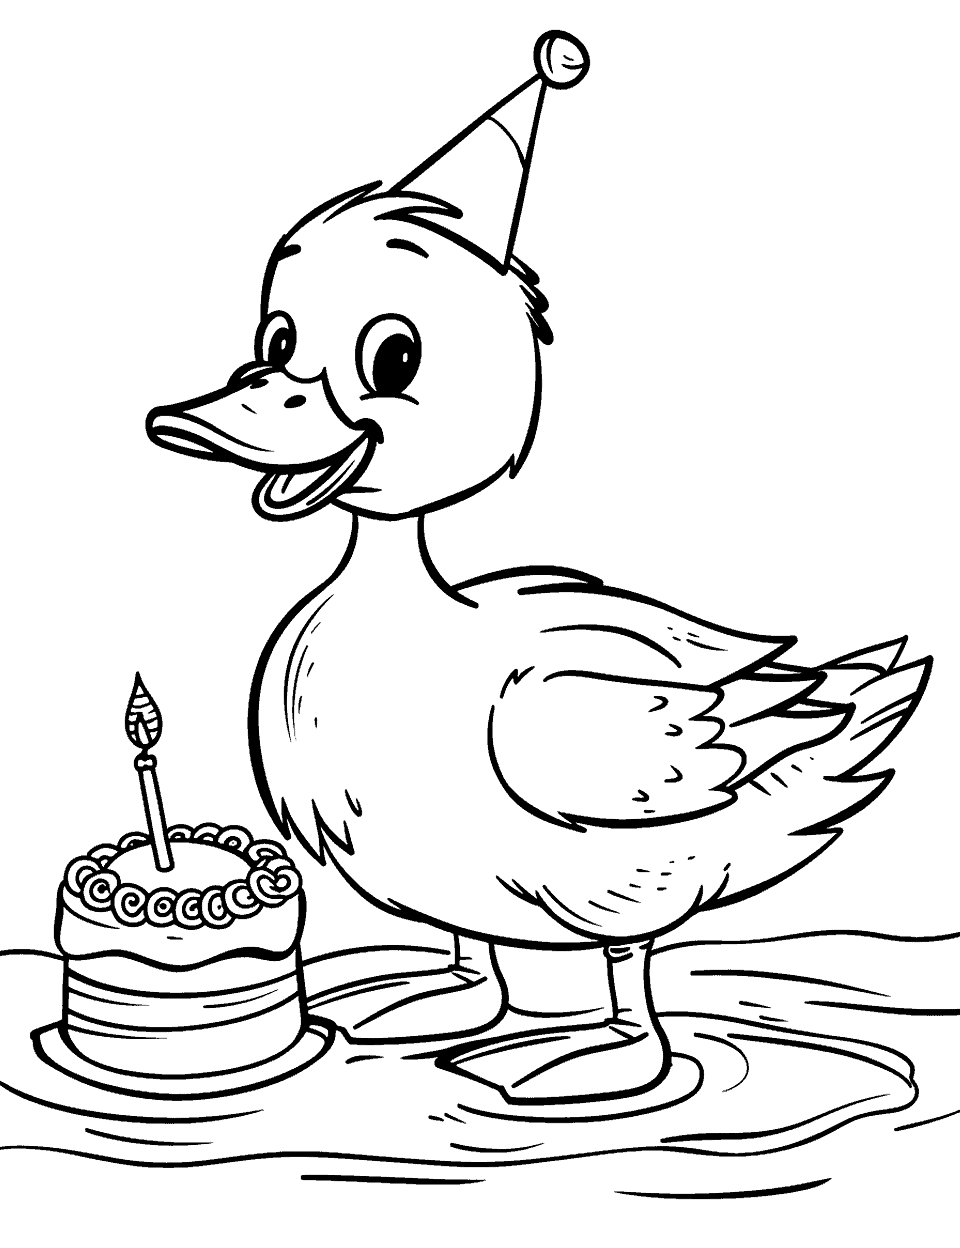 Duck with a Birthday Hat Coloring Page - A happy duck celebrating with a birthday hat and a cake in front of it.